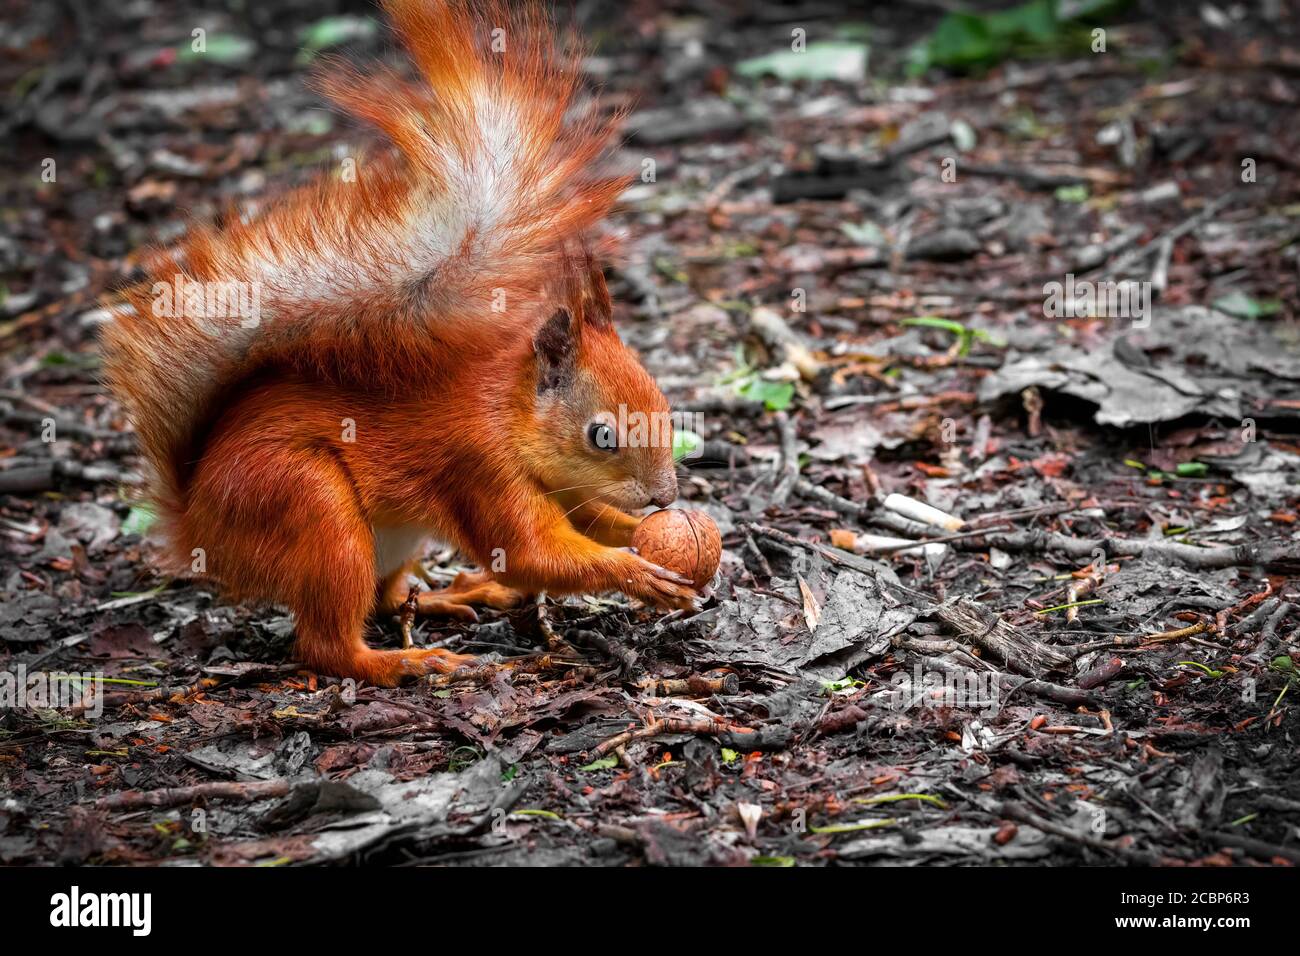 Cute red wild squirrel eating a walnut in the park. Close-up view Stock Photo